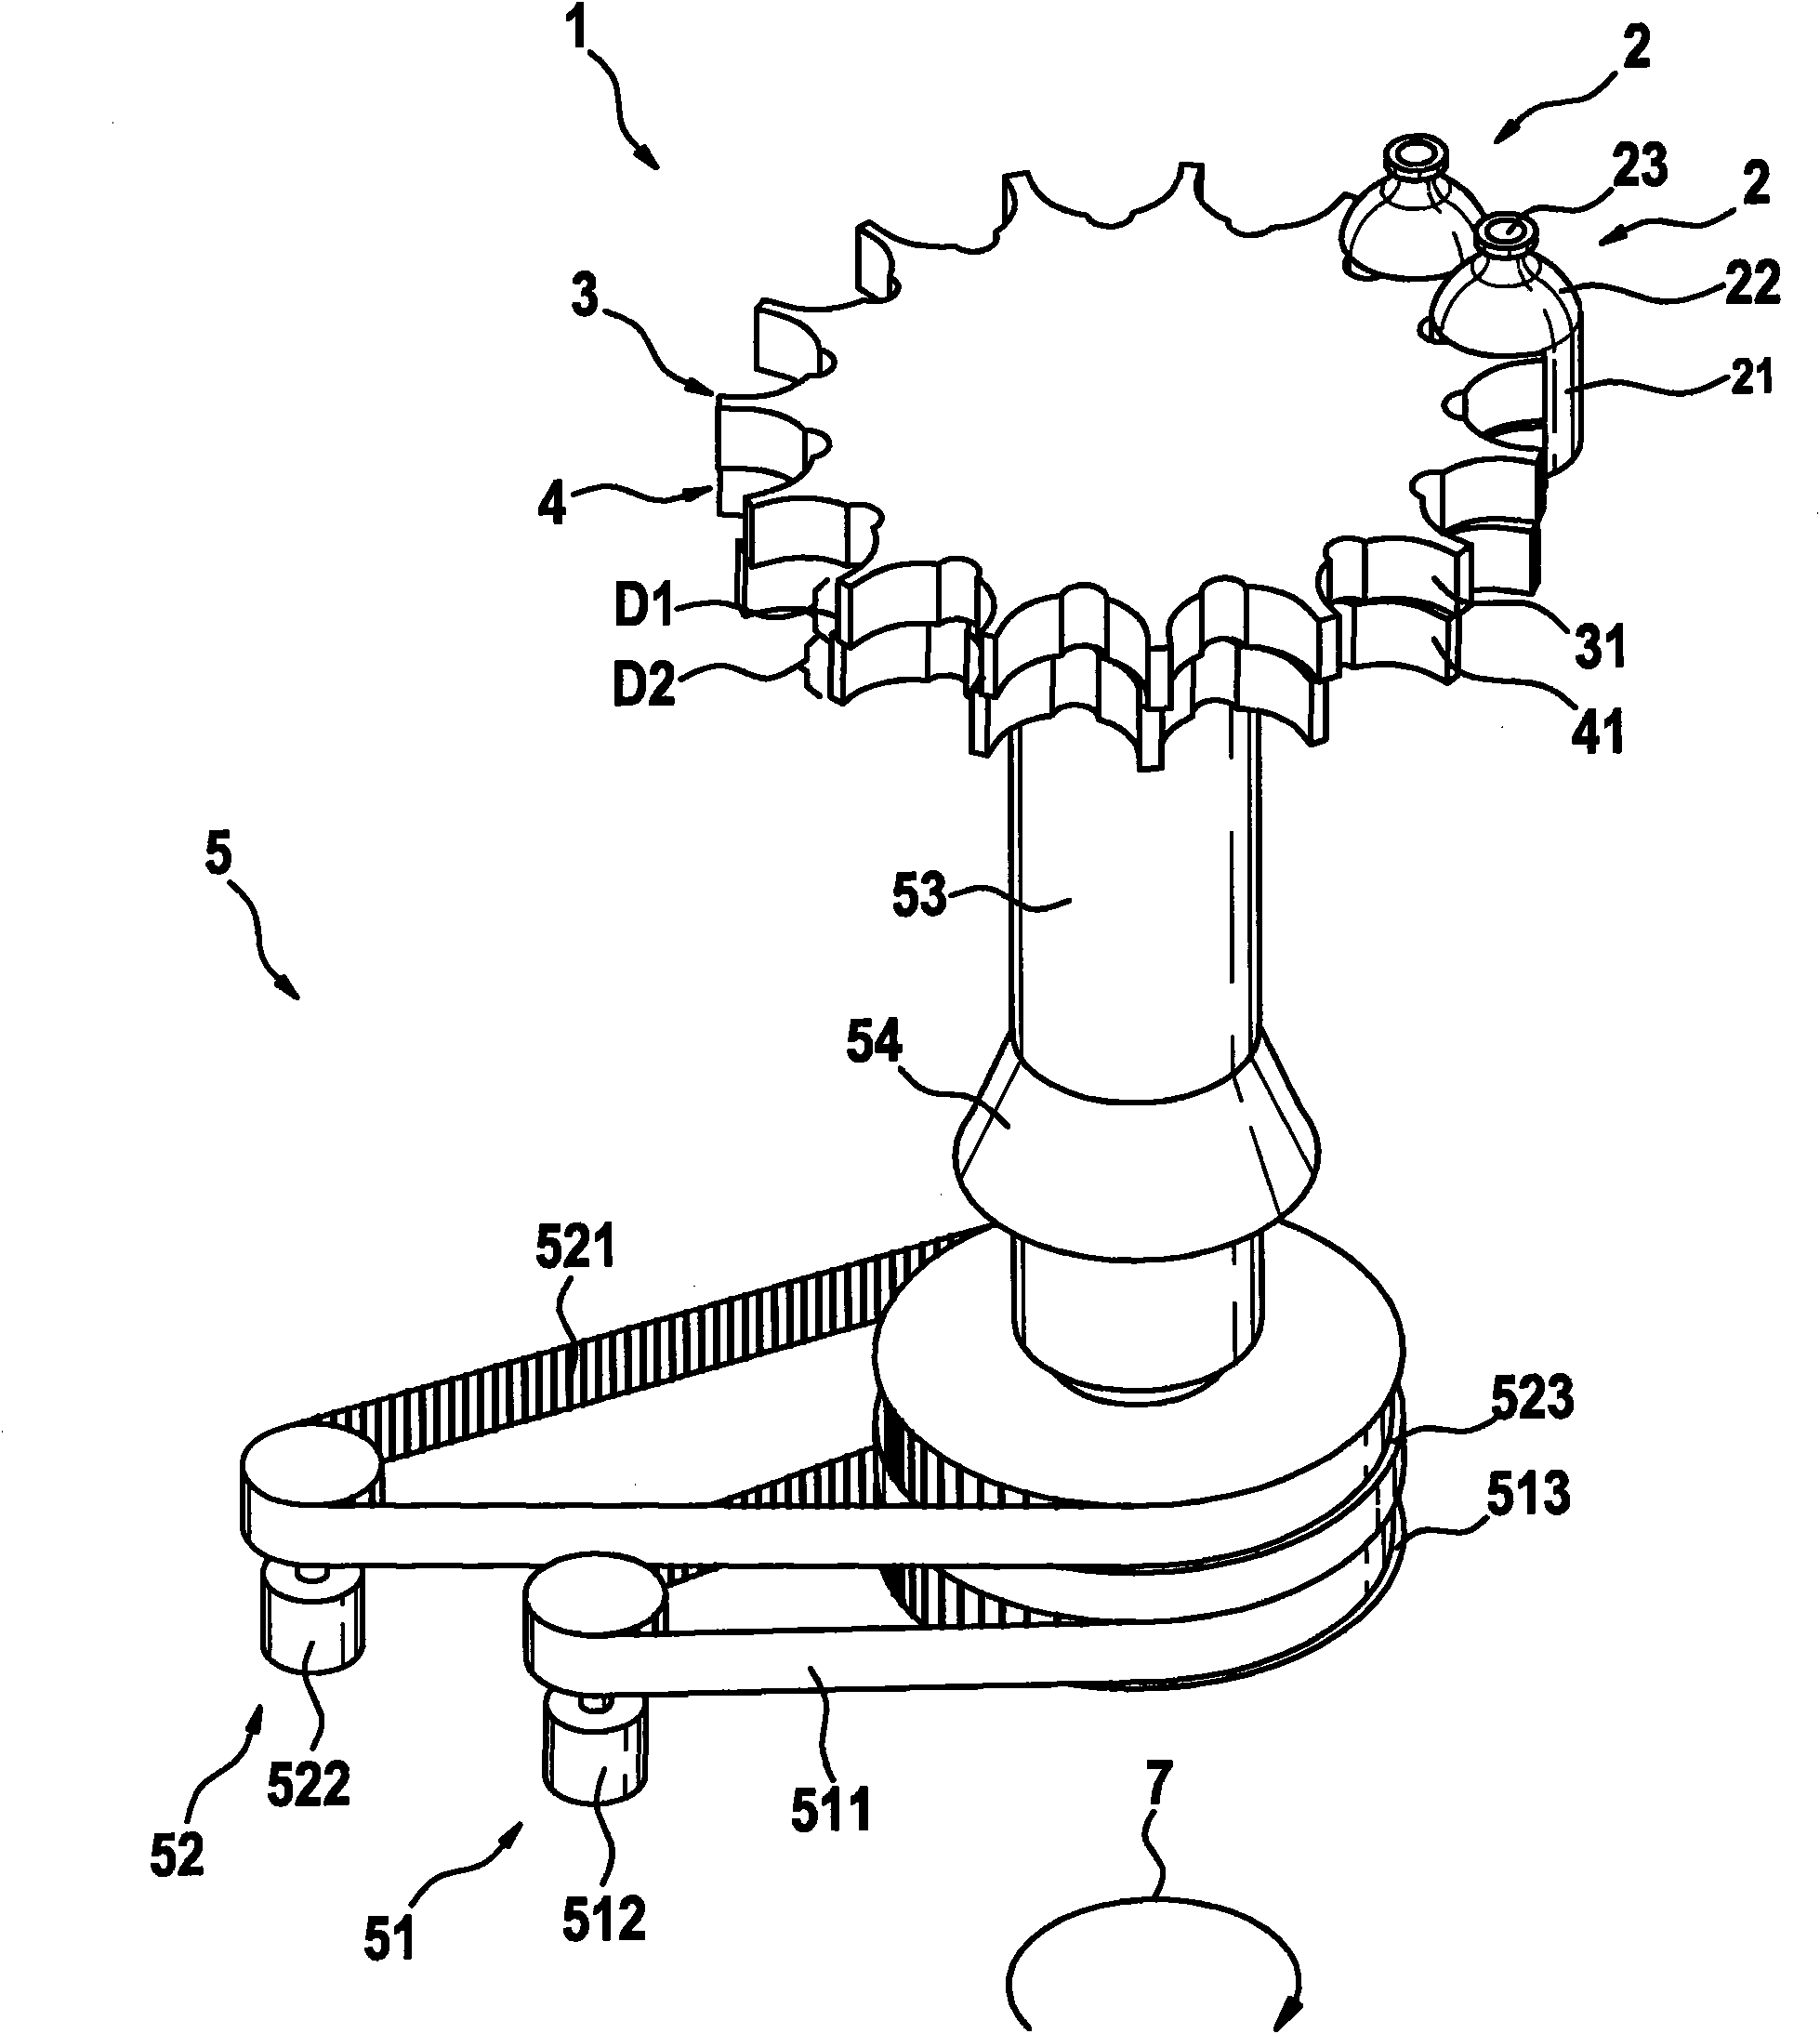 Device for transporting a container